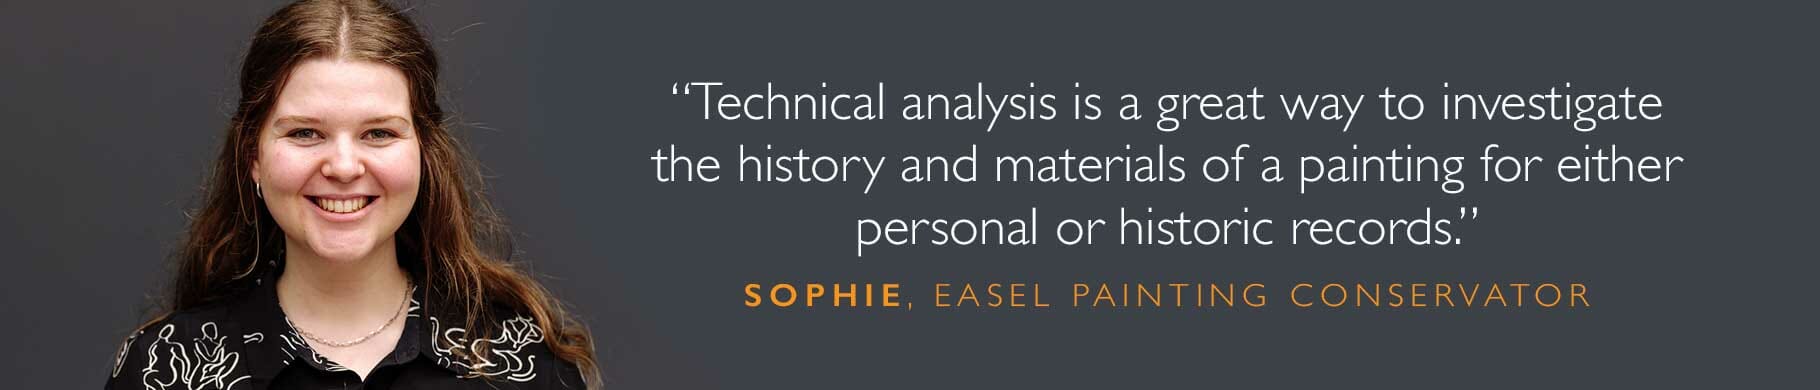 Sophie quotae about technical analysis